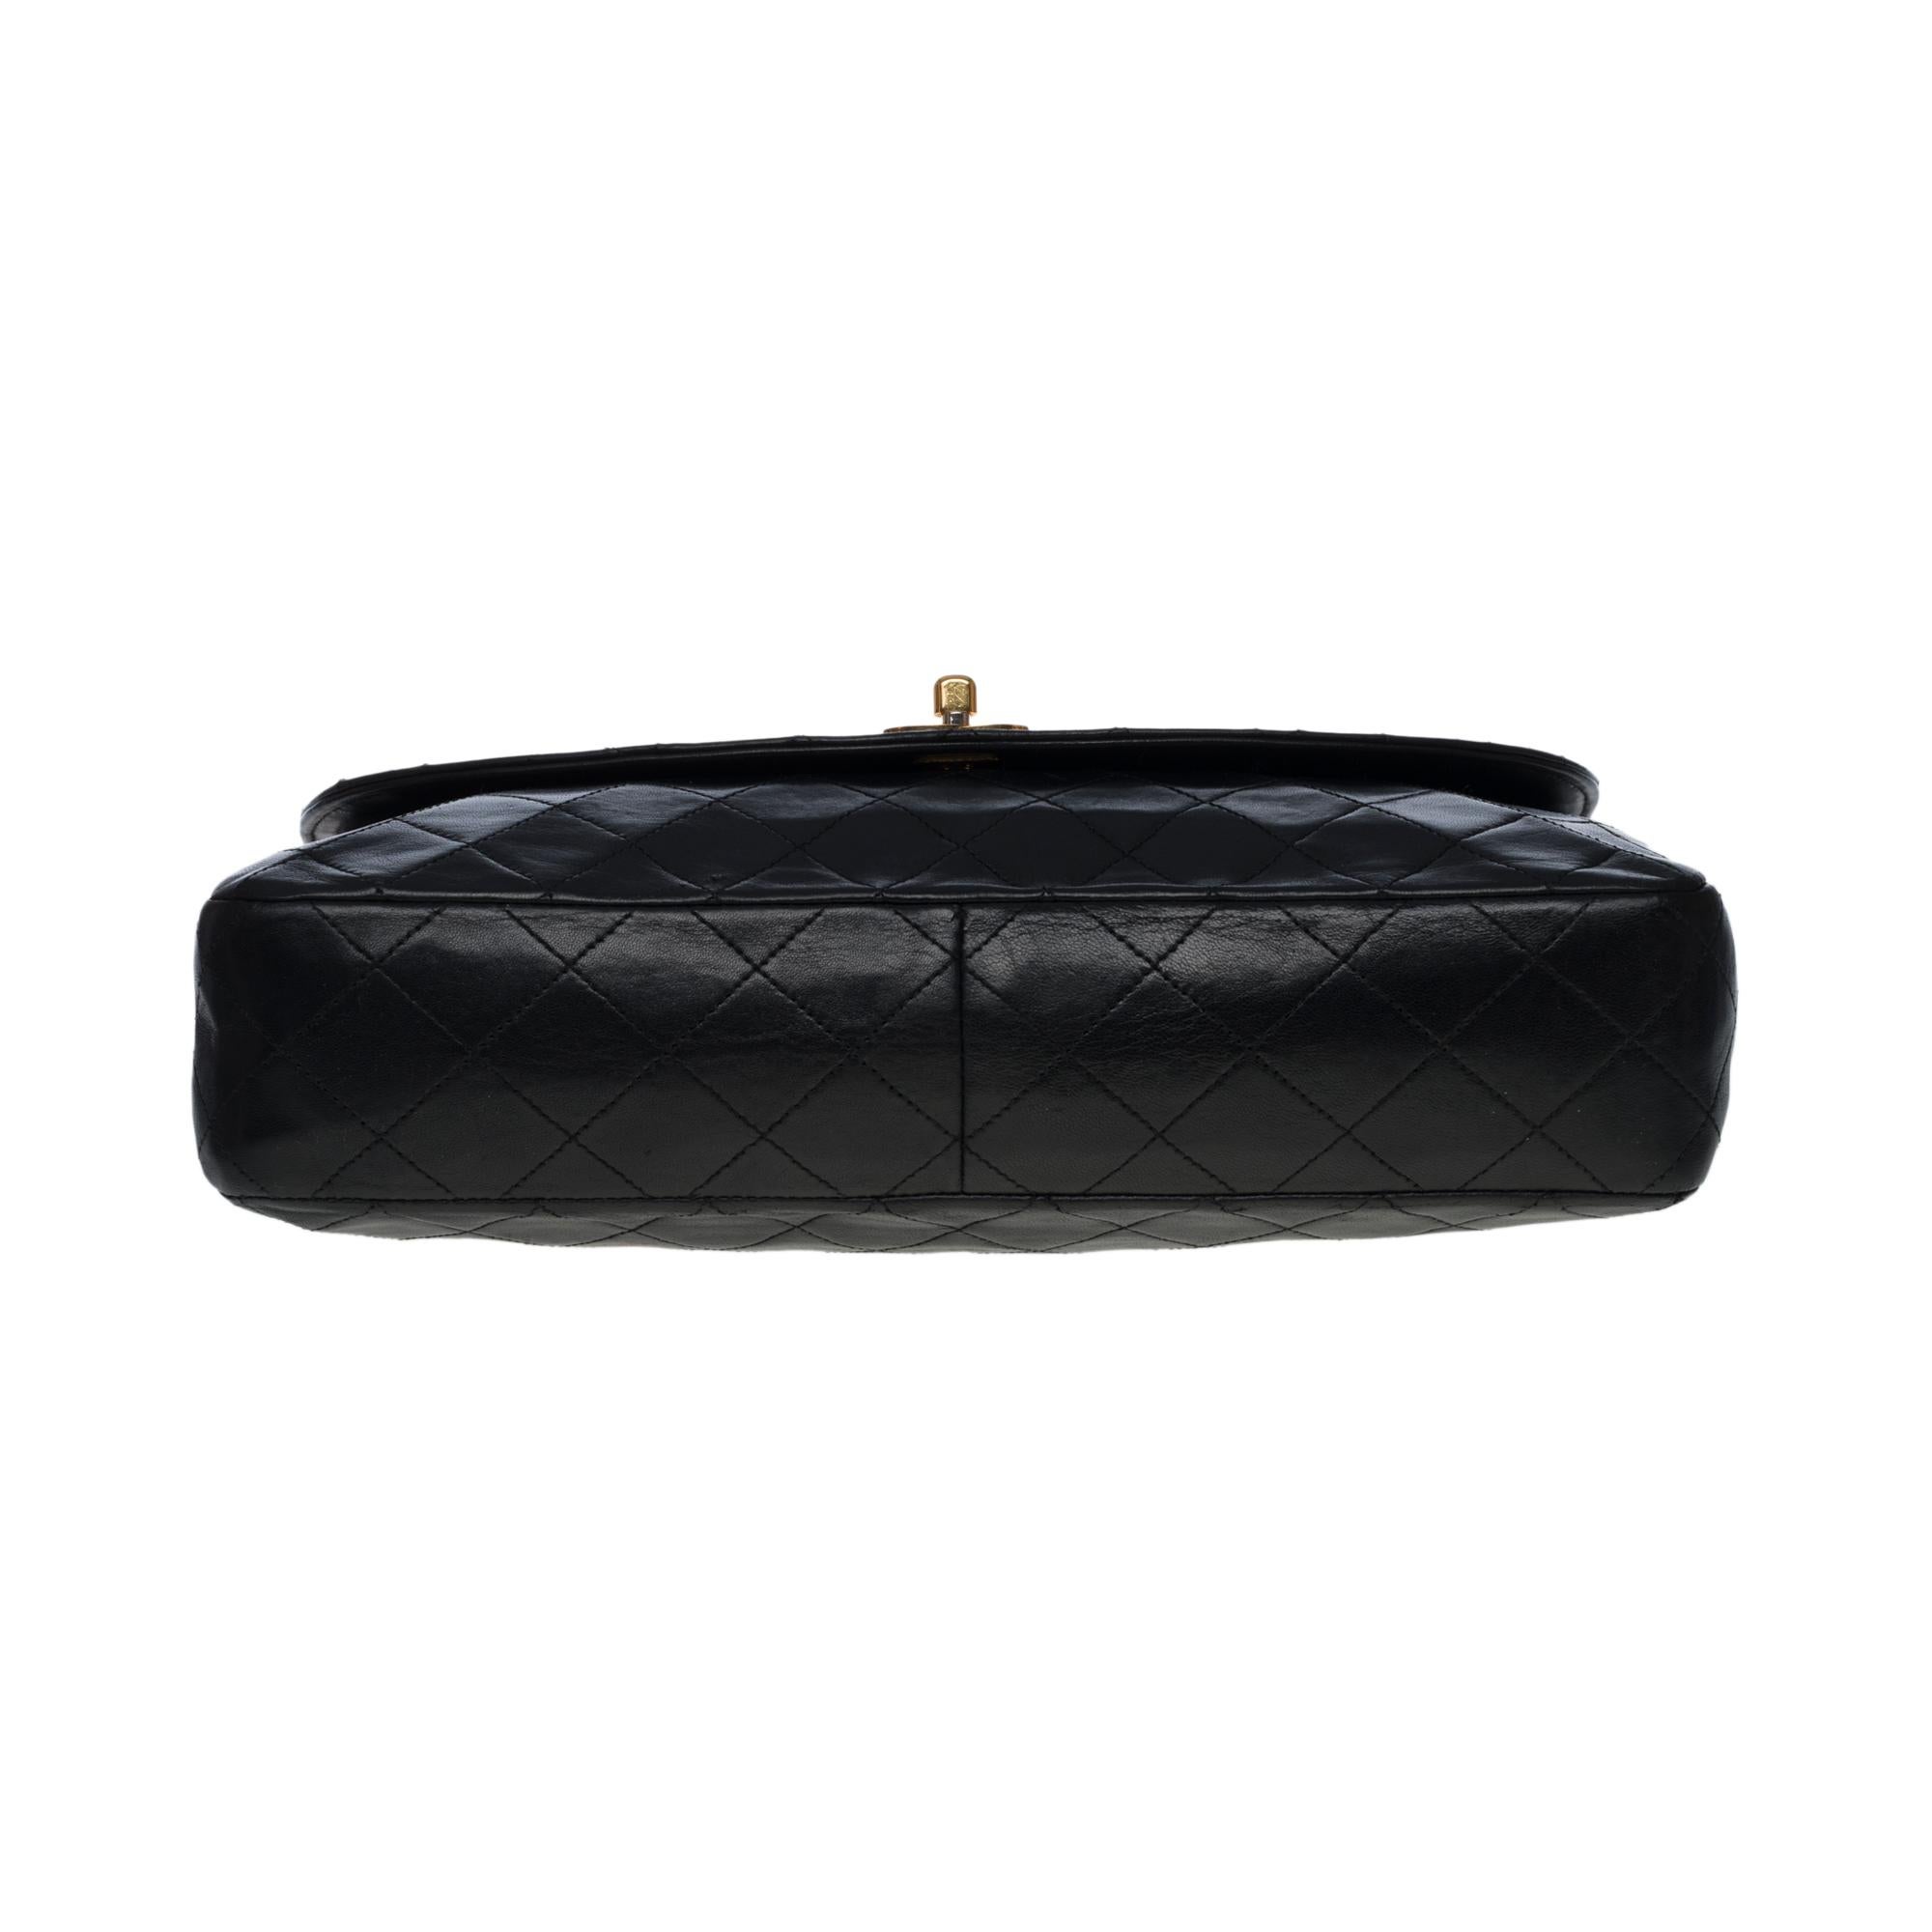 Chanel Classic Flap shoulder bag in black quilted lambskin, GHW 4